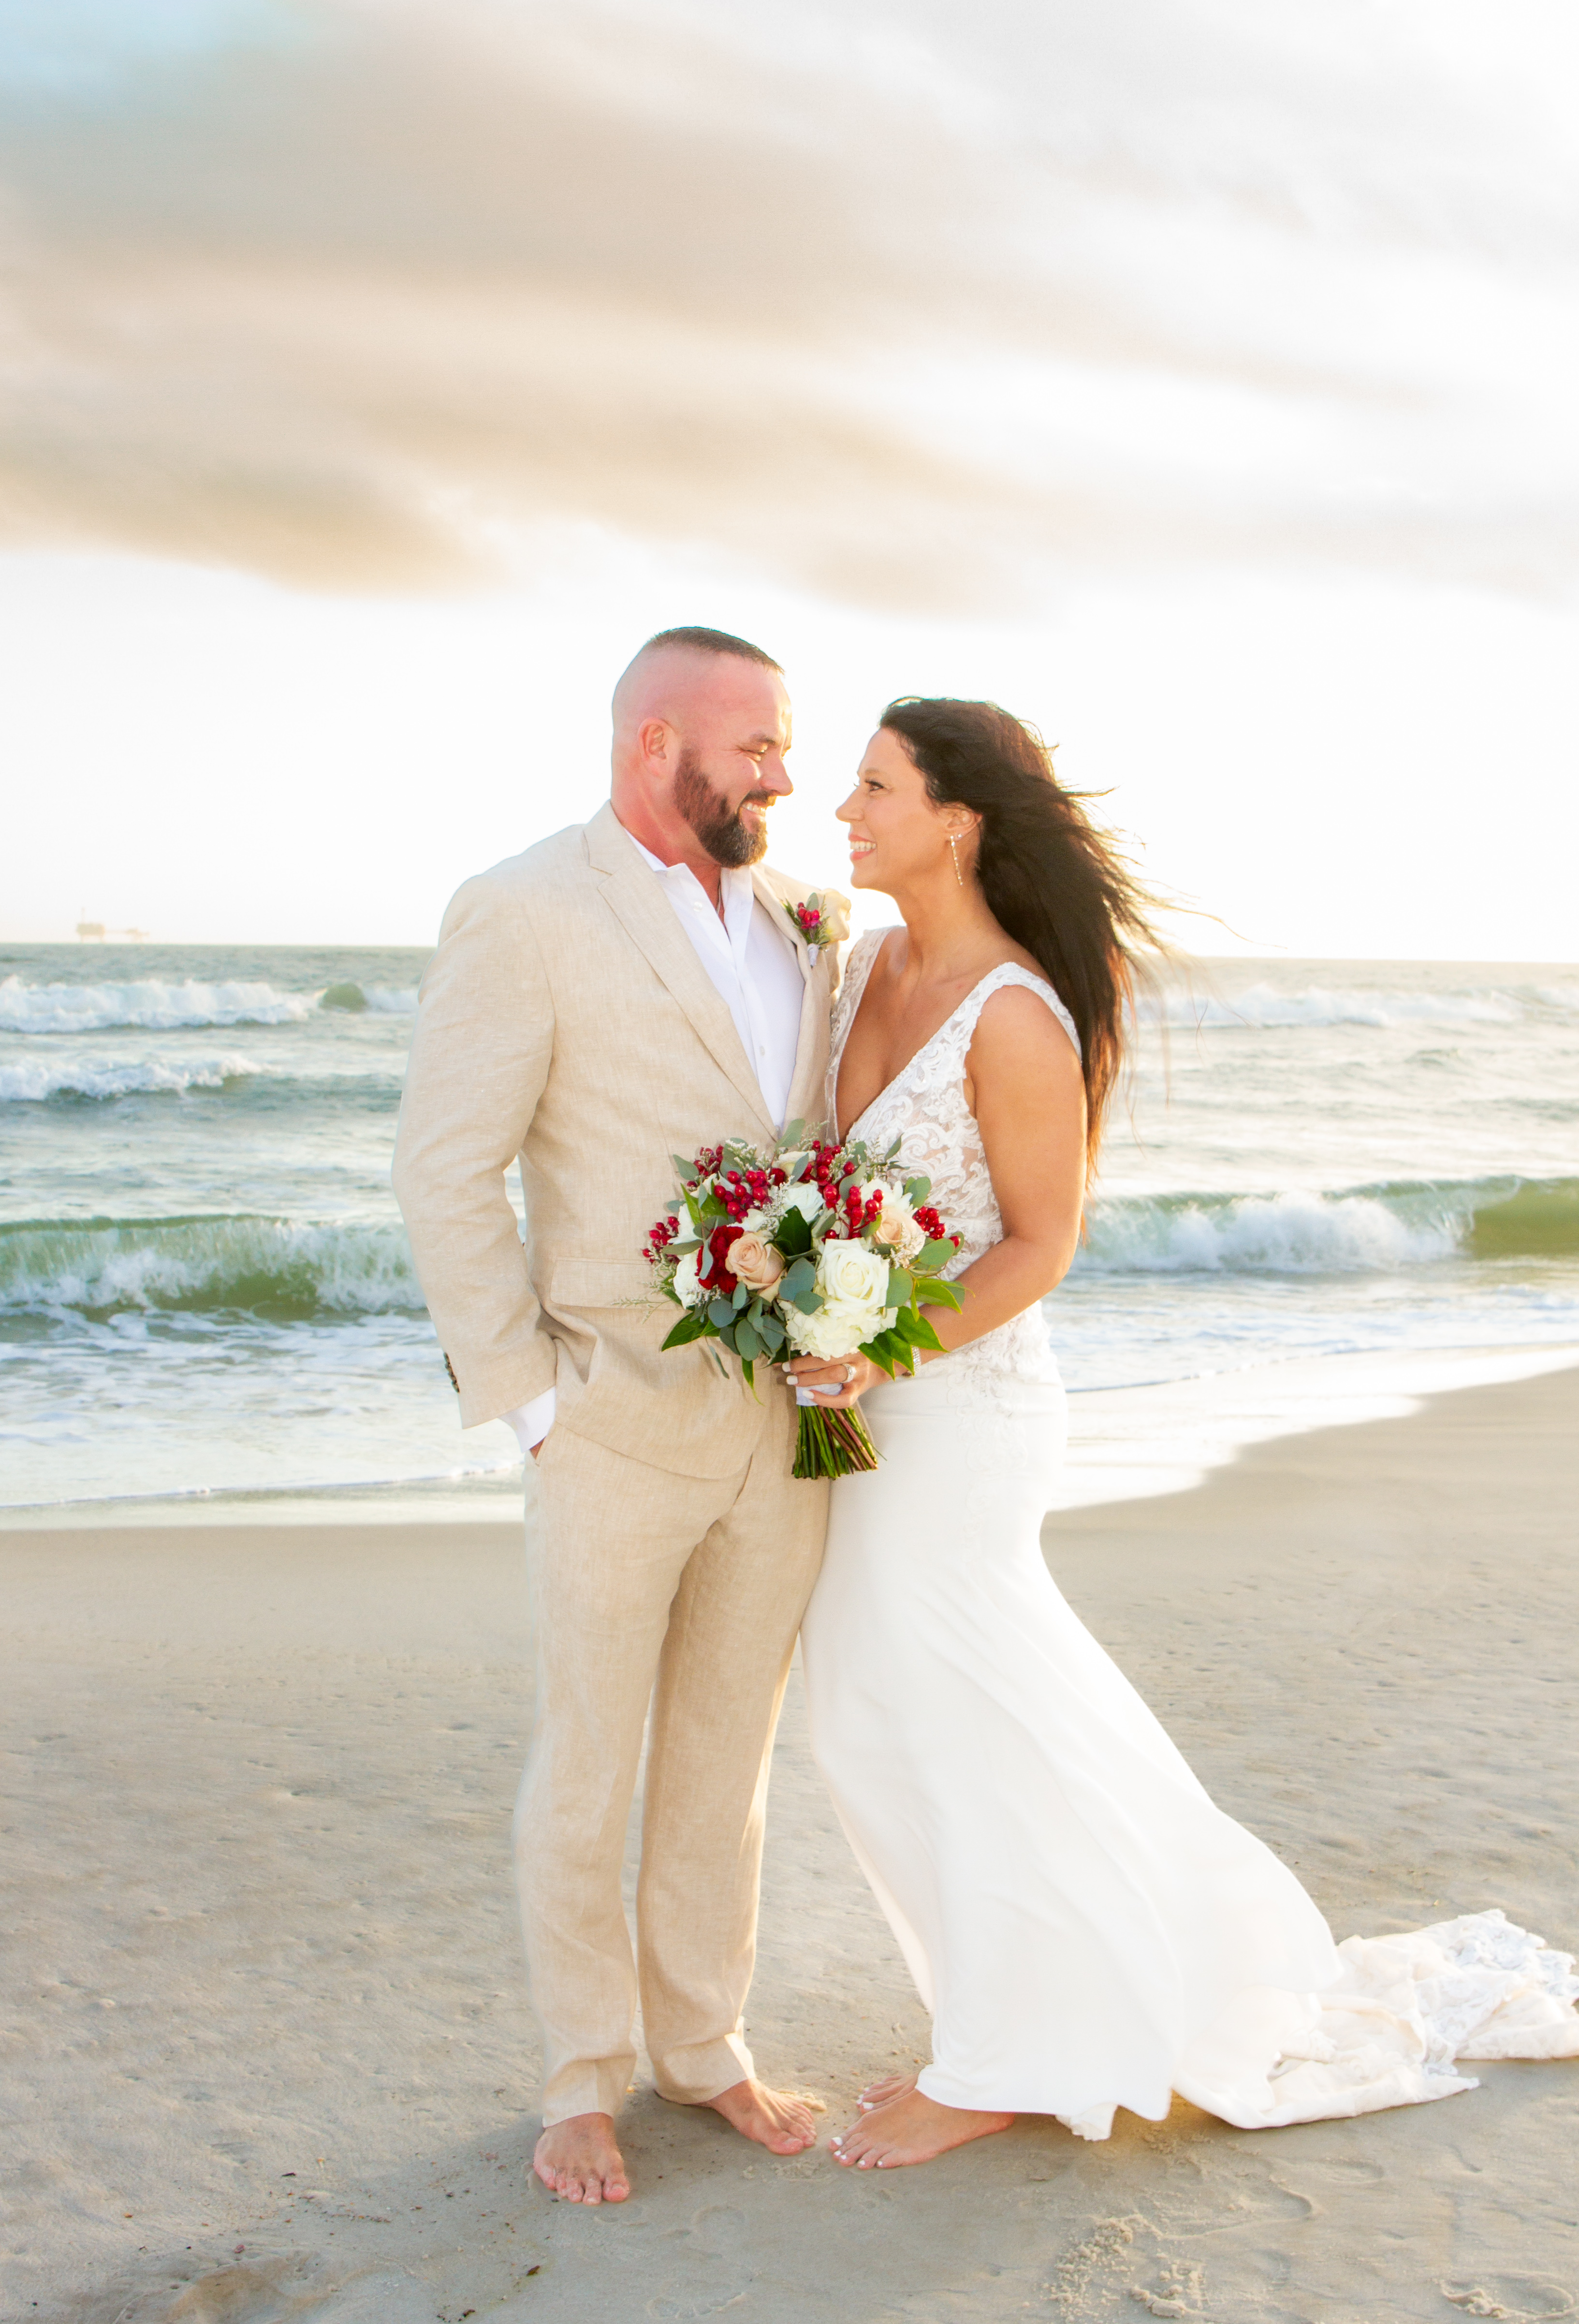 She trashed the dress at her Gulf Shores Beach Wedding